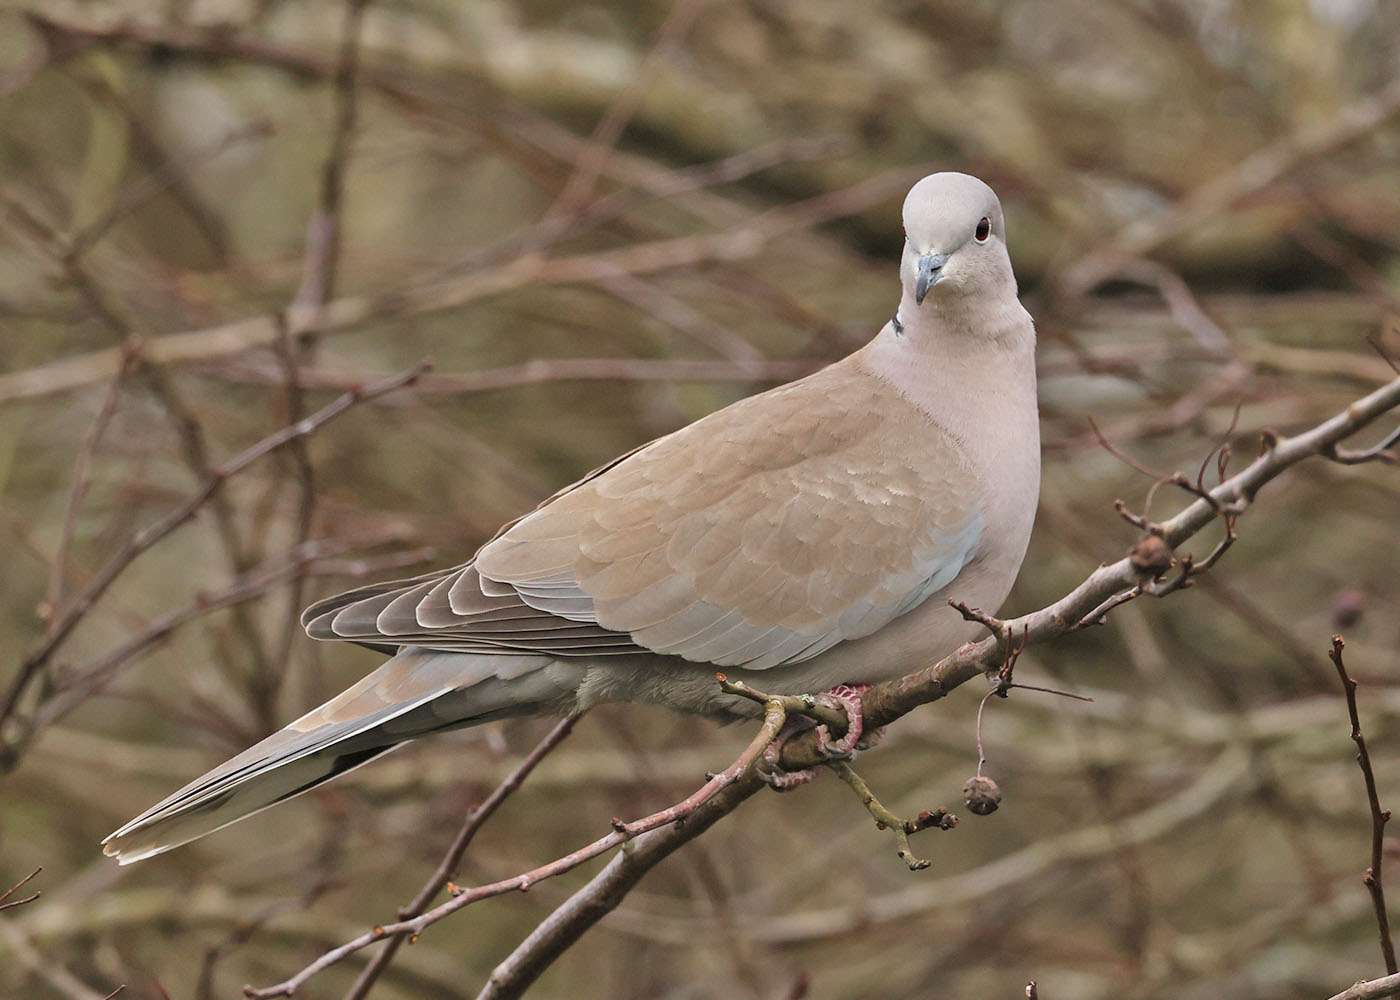 Collared Dove by Steve Hopper at South Brent